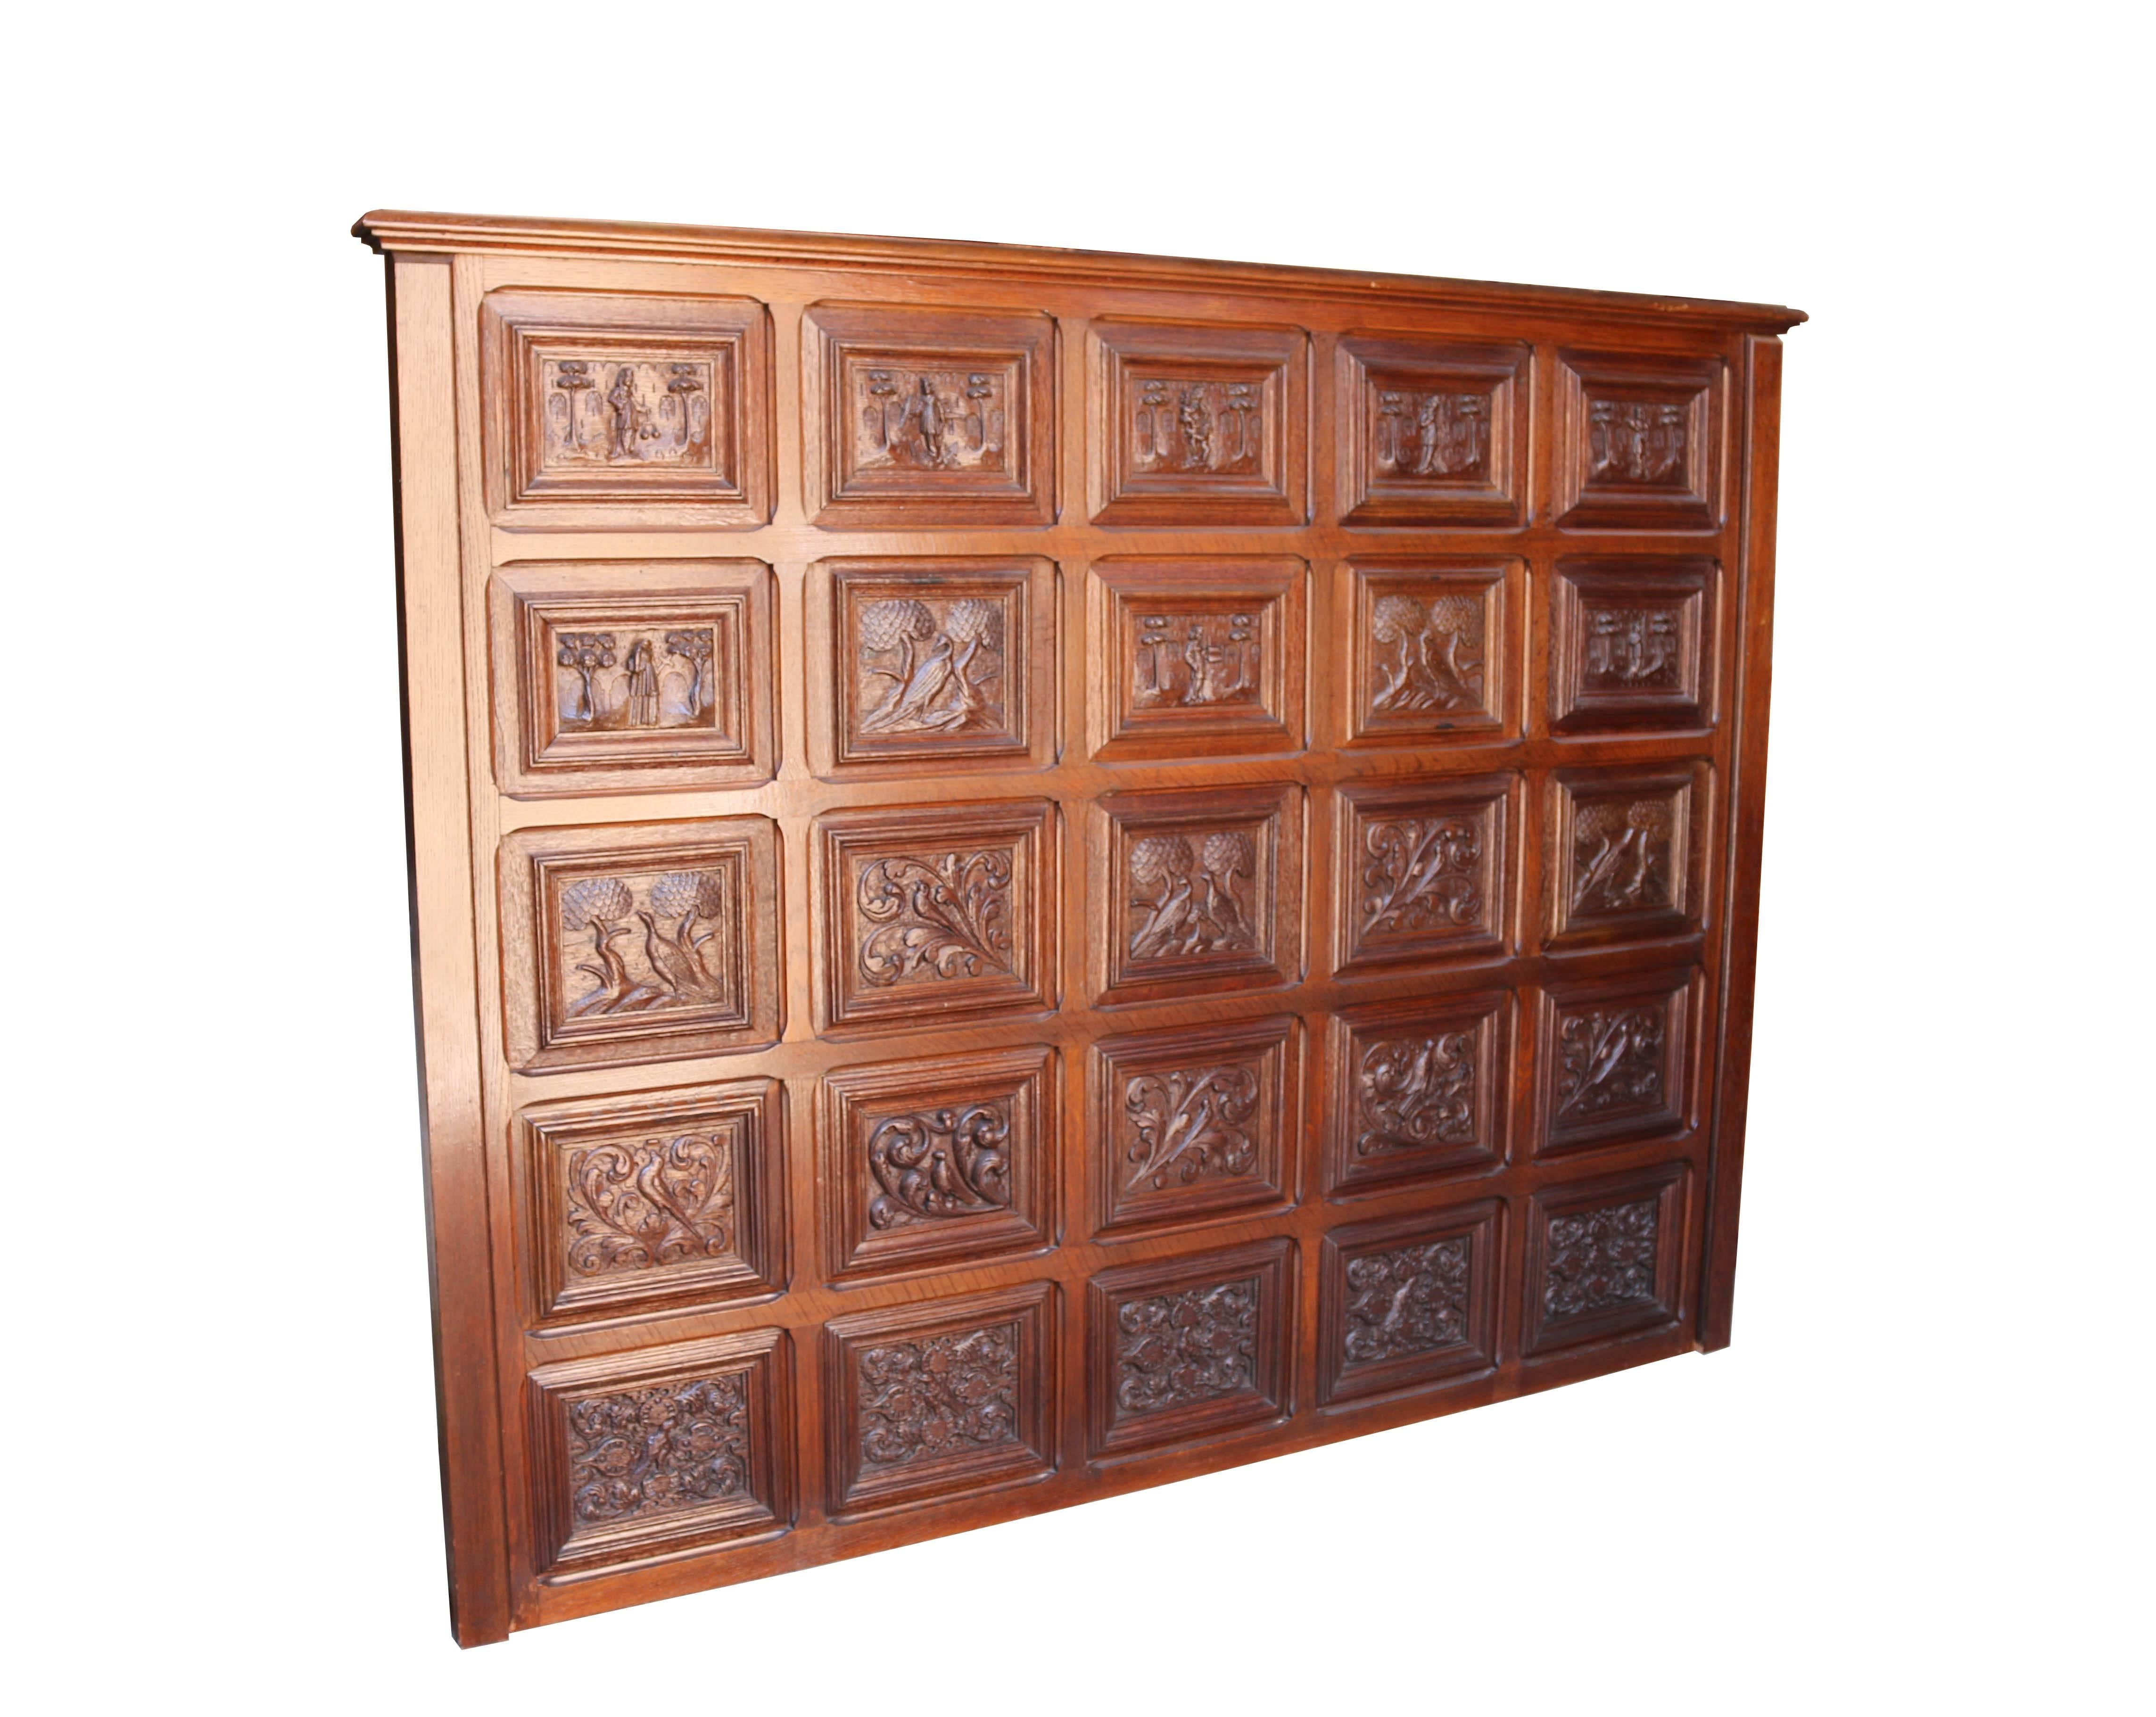 Consisting of 25 hand-carved oak panels set within an oak frame. Believed to have been purpose made as a headboard. The back previously having been covered with material.